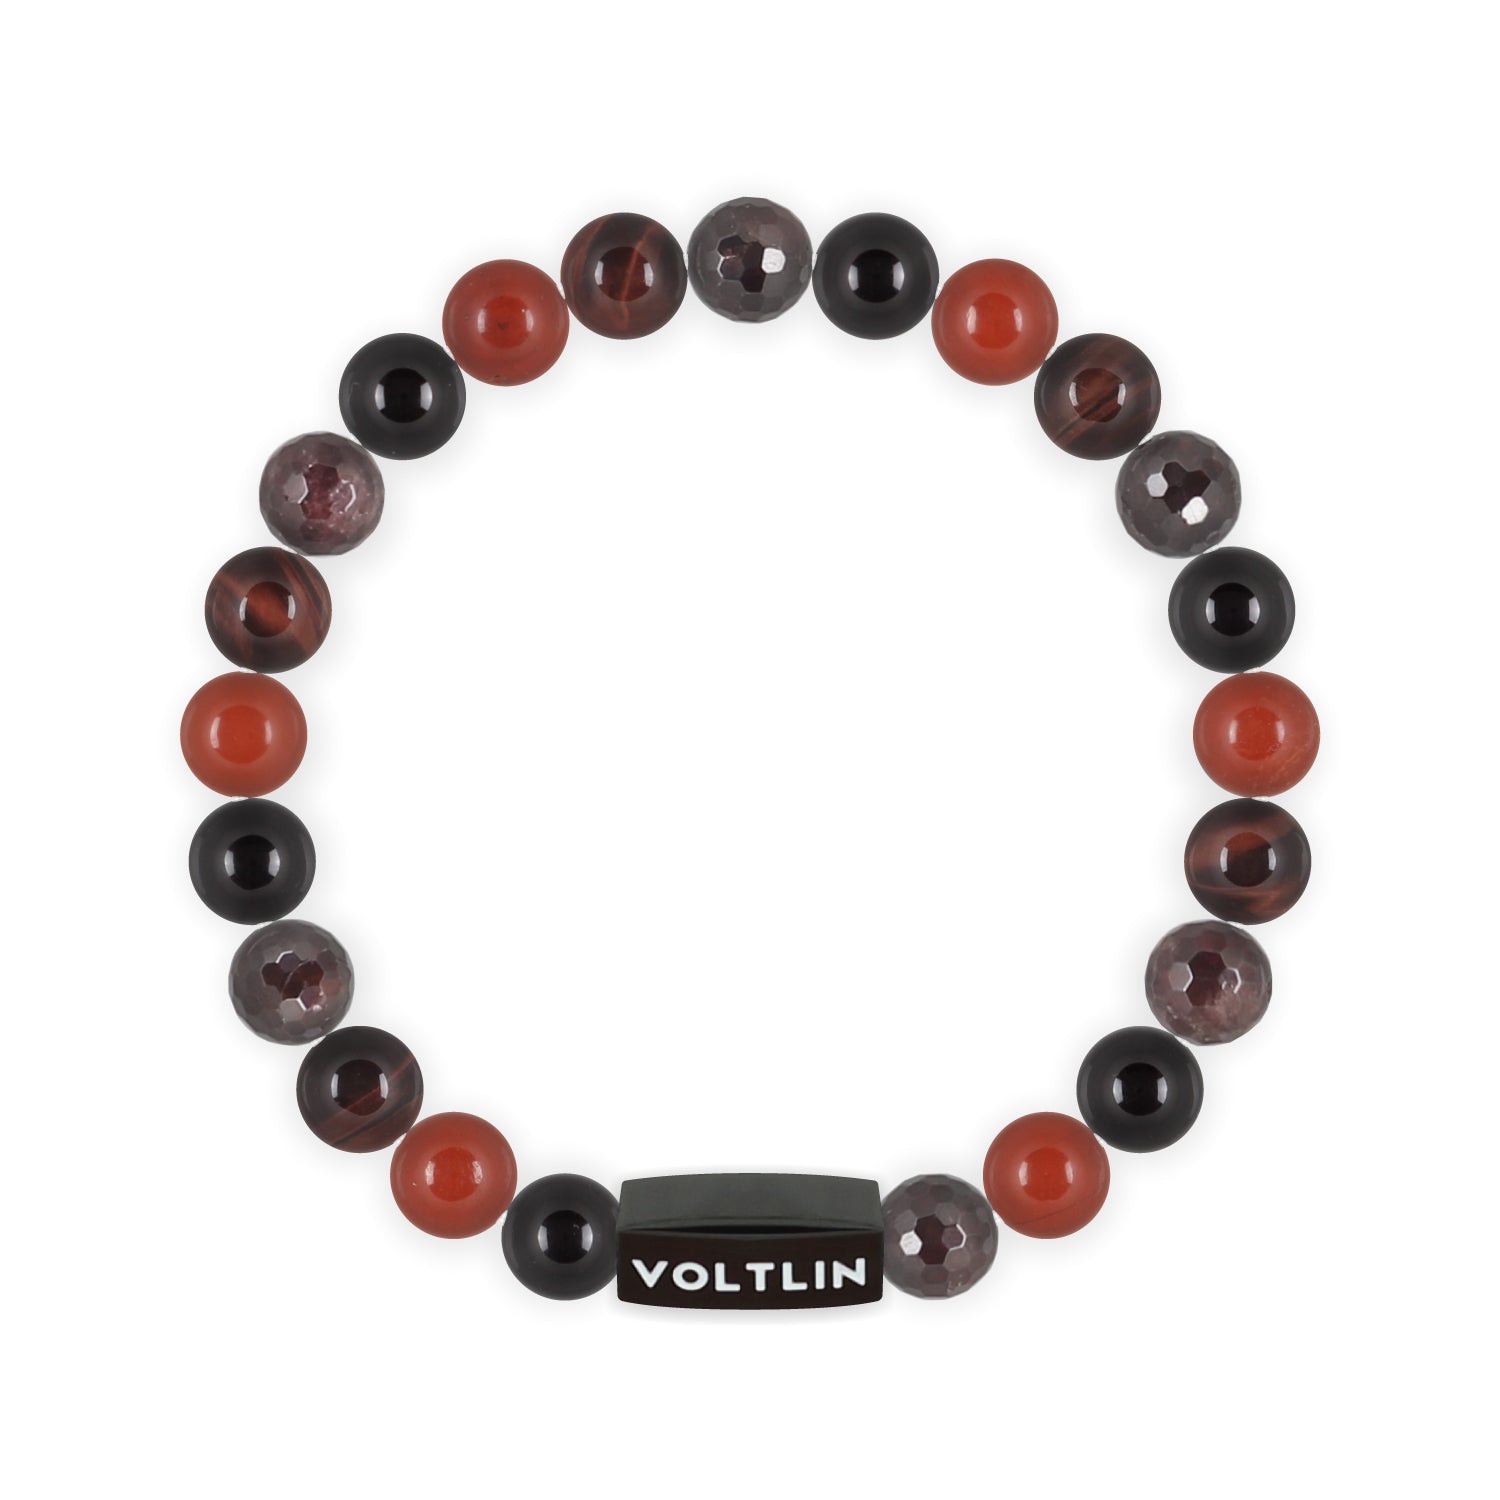 Front view of an 8mm Root Chakra crystal beaded stretch bracelet with black stainless steel logo bead made by Voltlin